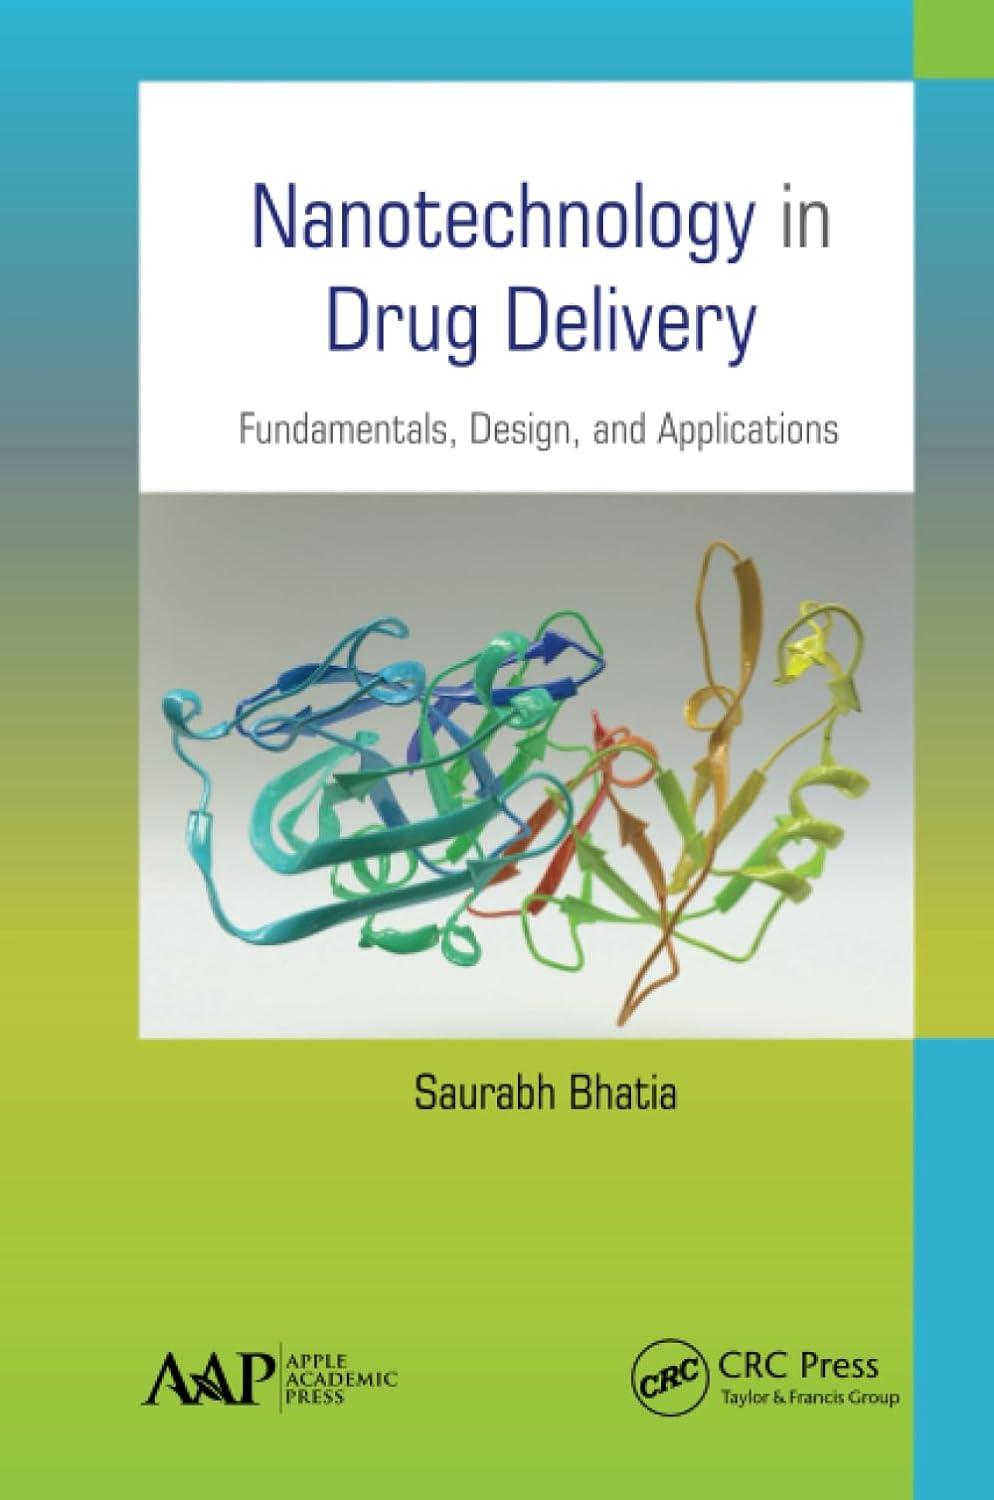 Nanotechnology in Drug Delivery: Fundamentals, Design, and Applications by  Saurabh Bhatia 